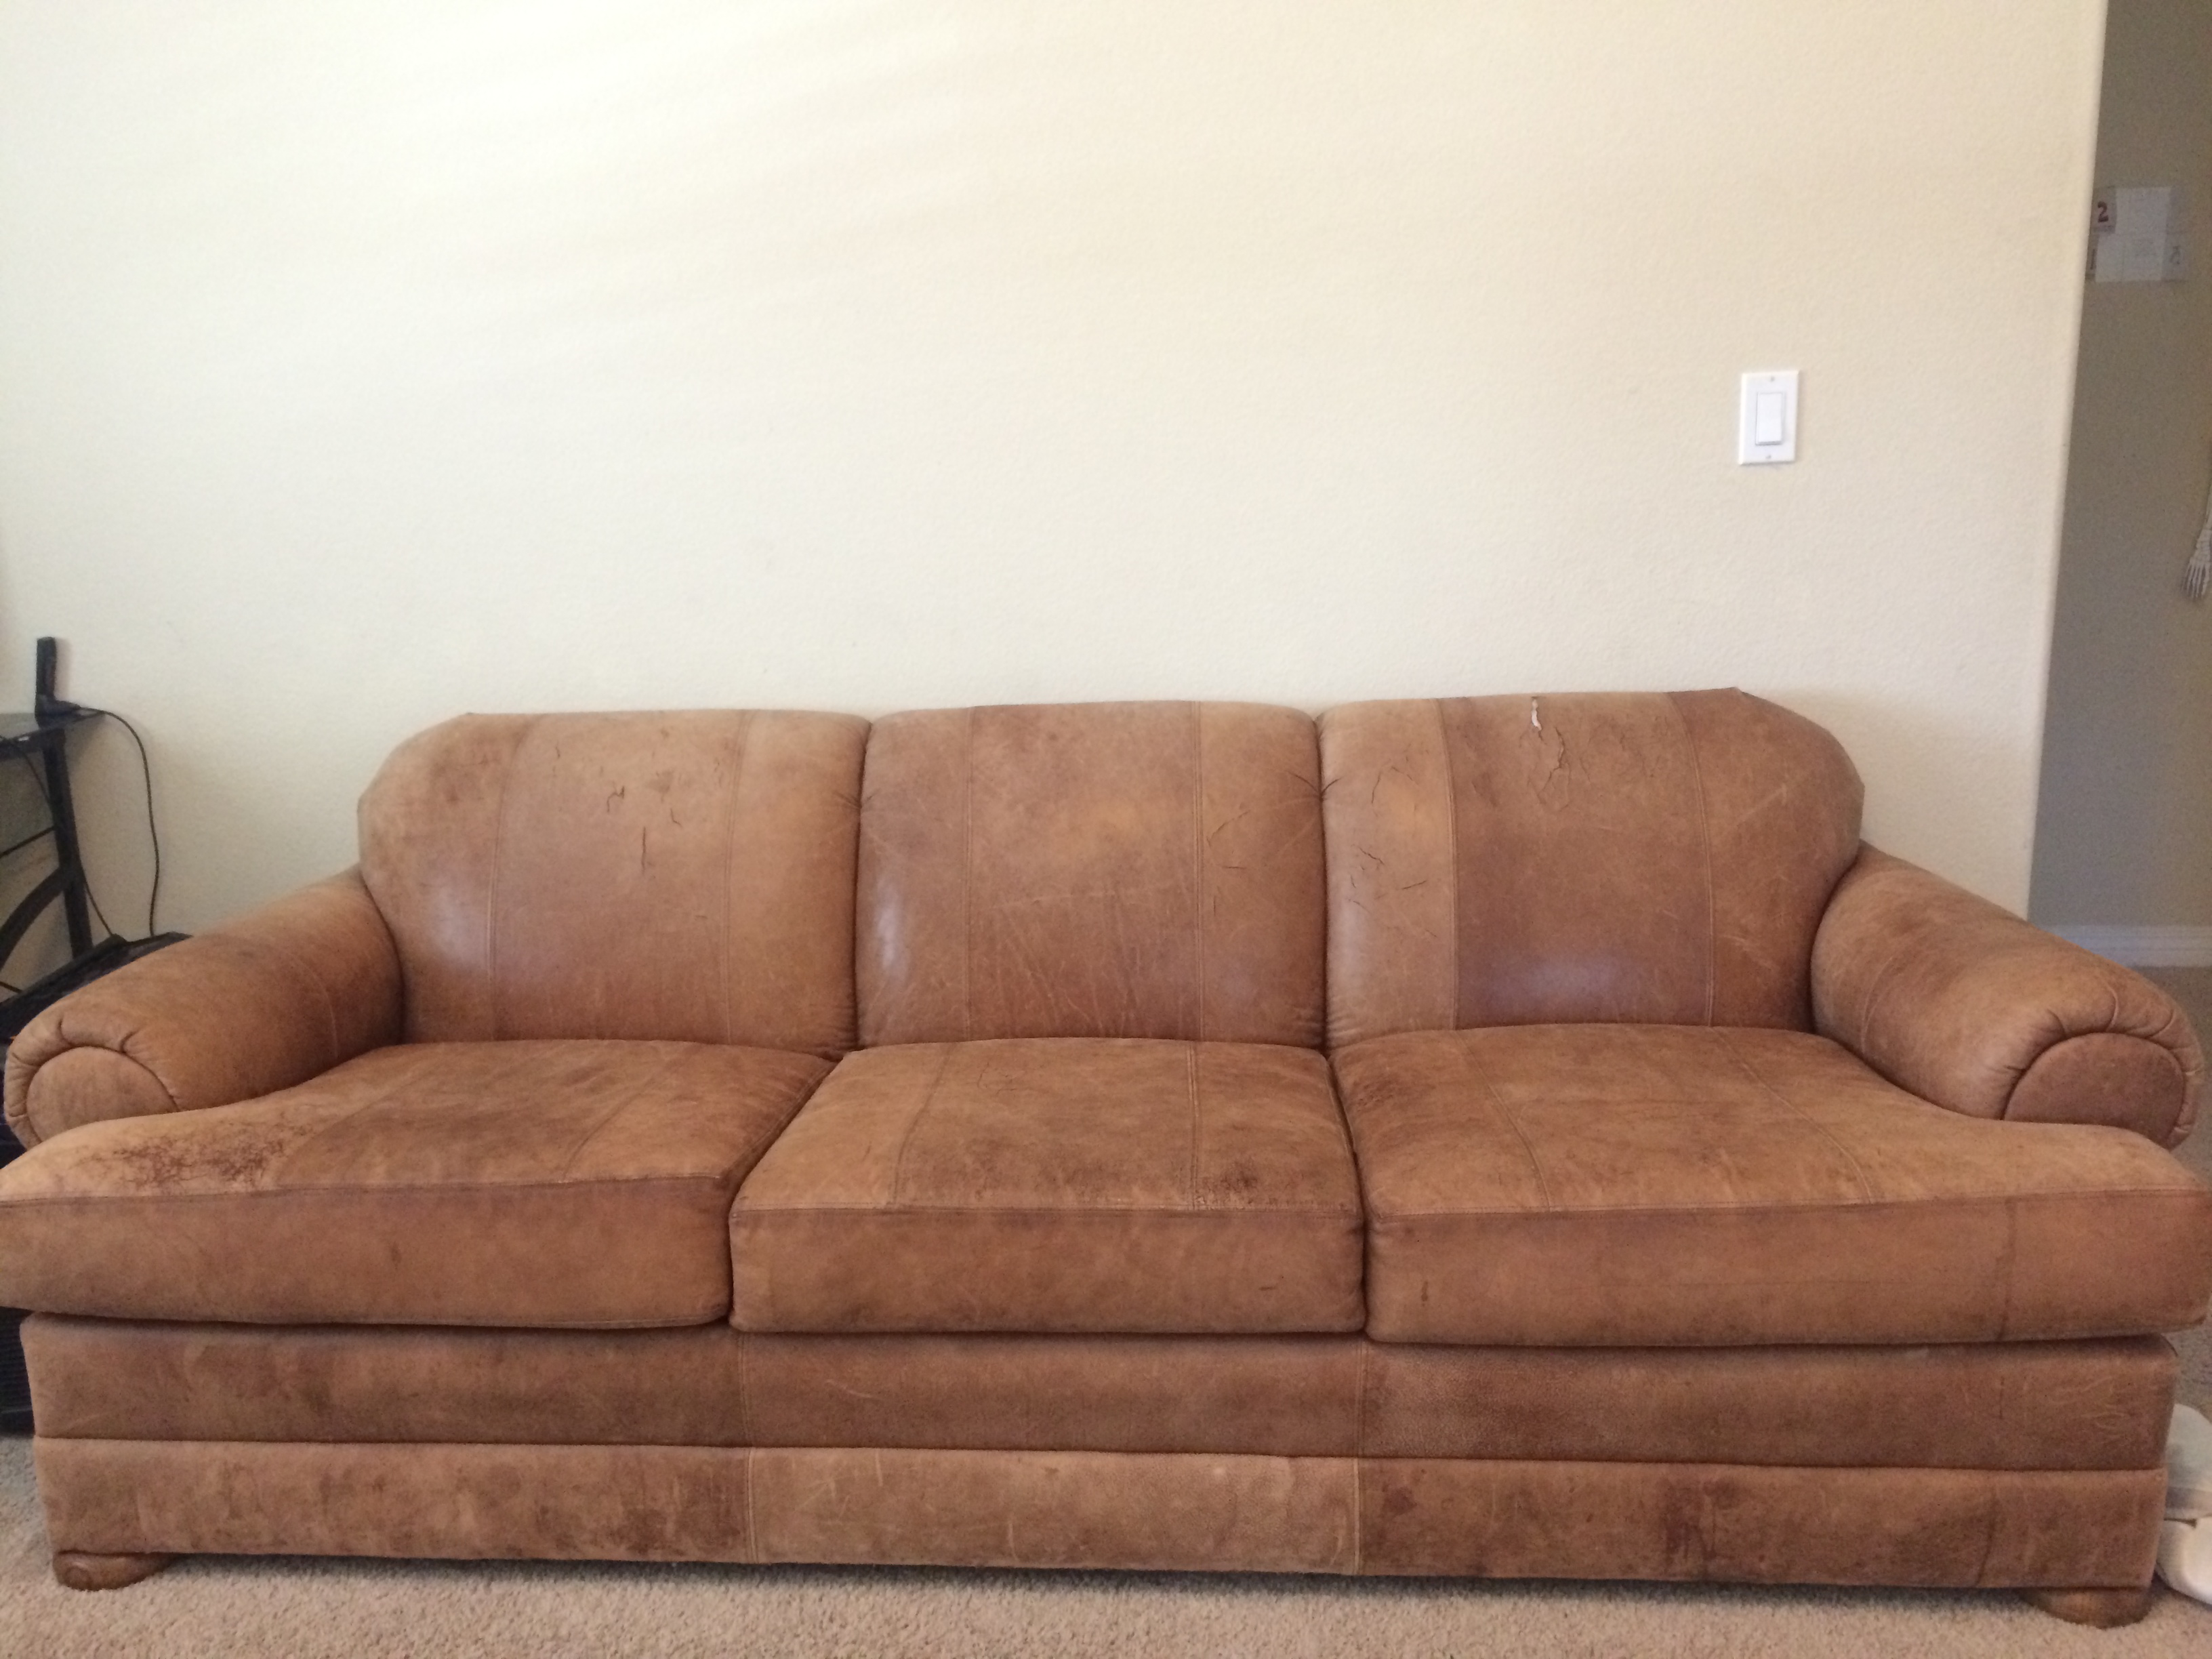 Nubuck Leather Couch To Clean Fix, How To Protect Nubuck Leather Sofa